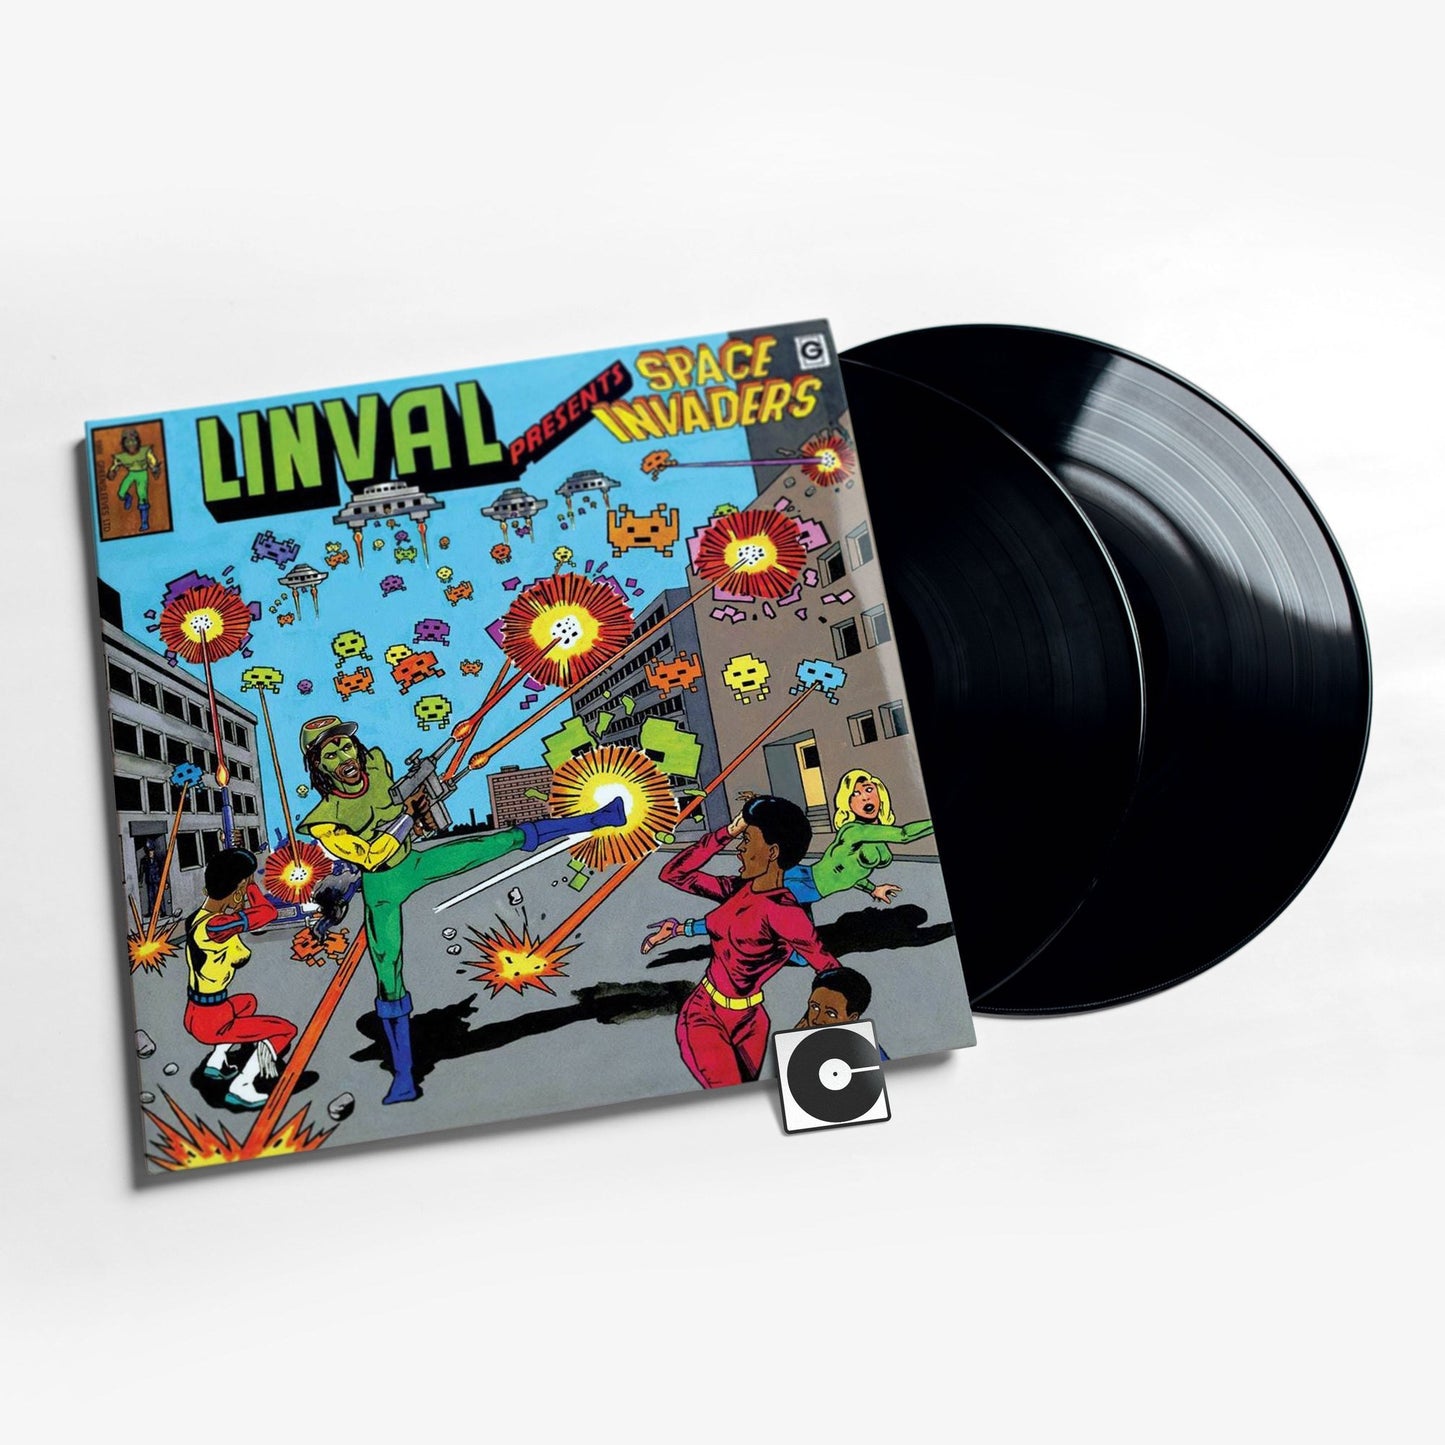 Linval Thompson - "Linval Presents: Space Invaders"